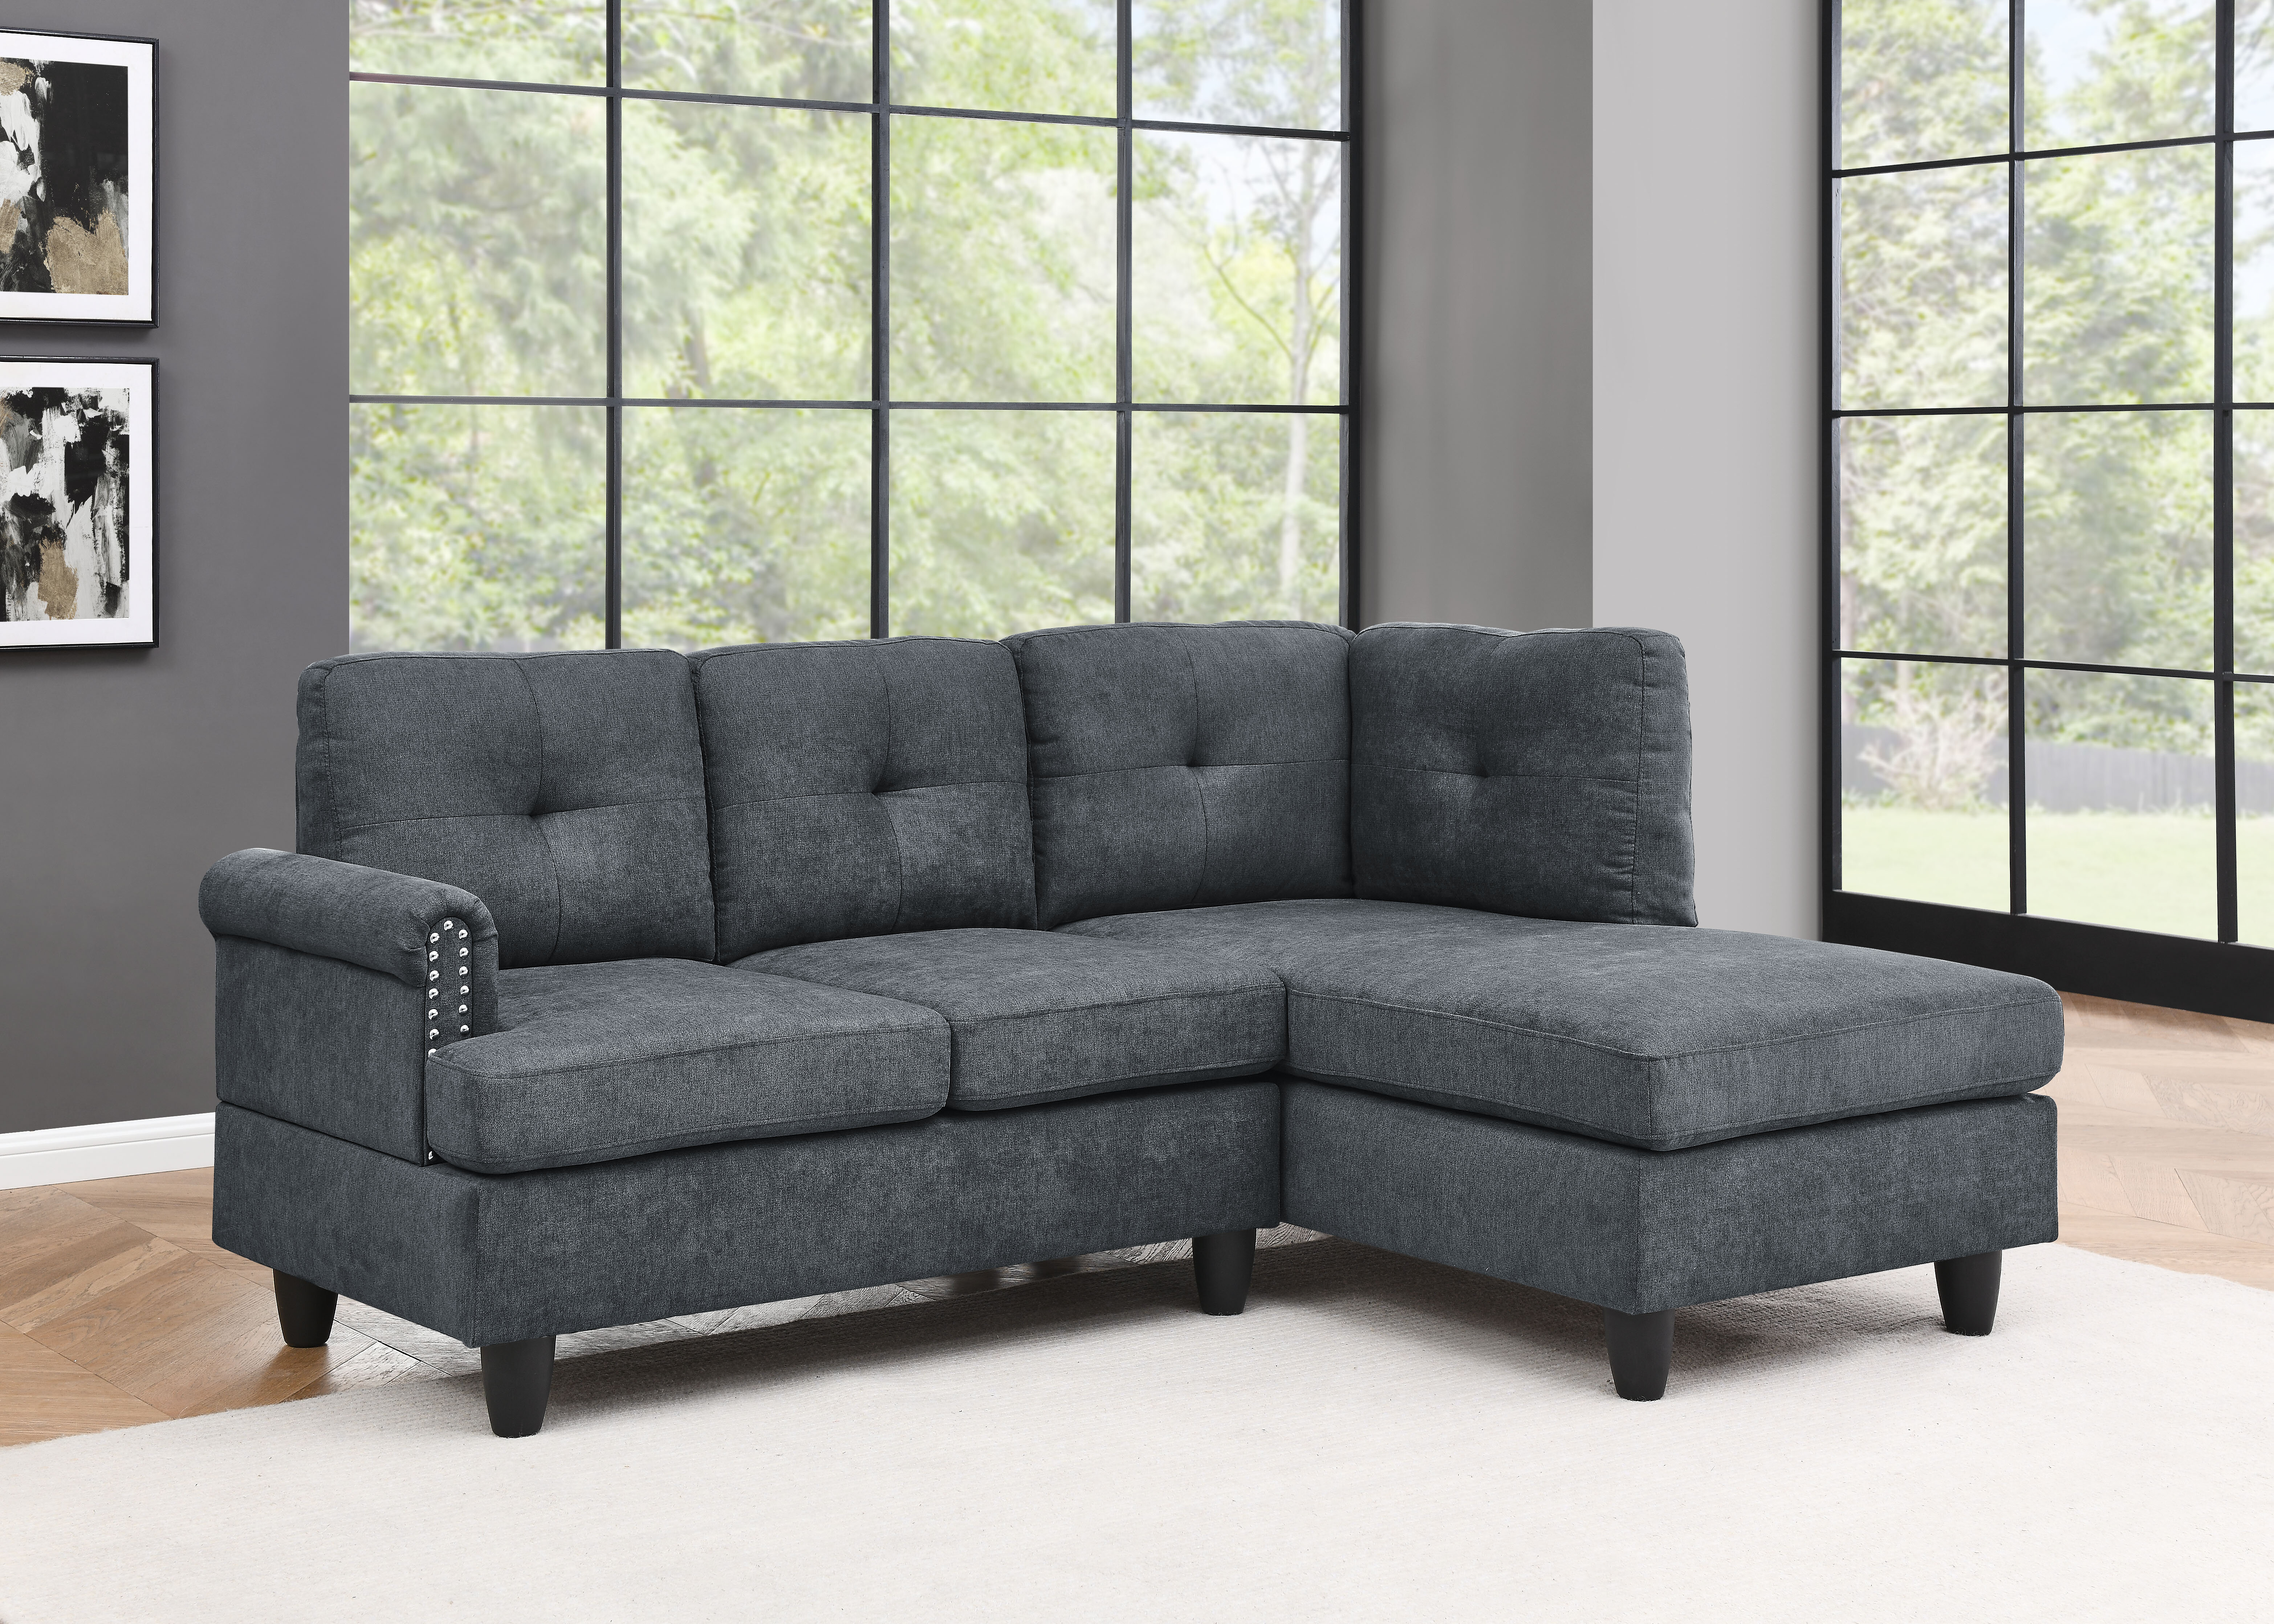 2 - Piece Upholstered Chaise Sectional